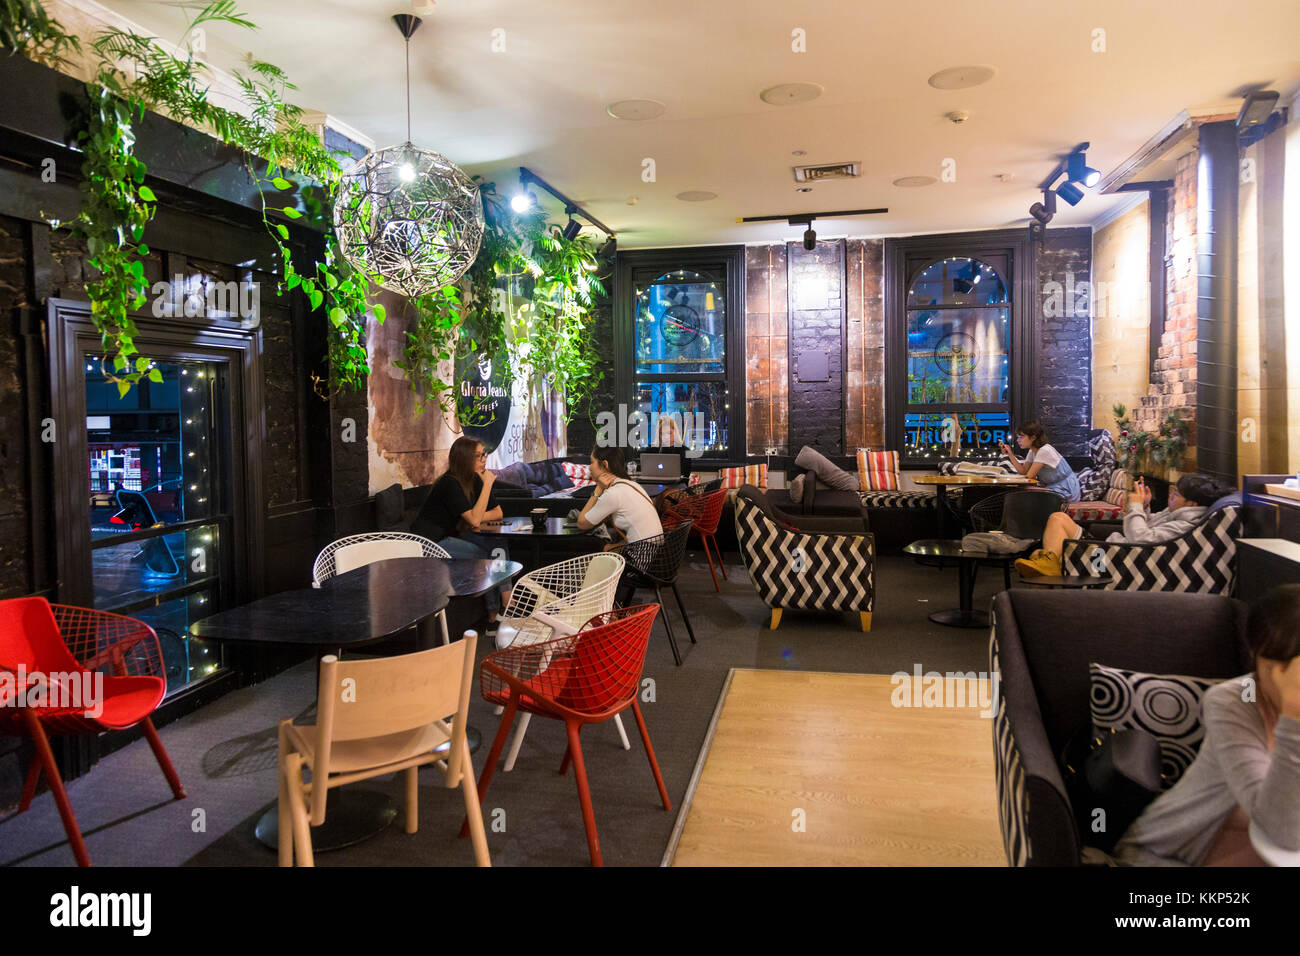 Interior of a cosy, eclectic cafe (Auckland, New Zealand) Stock Photo